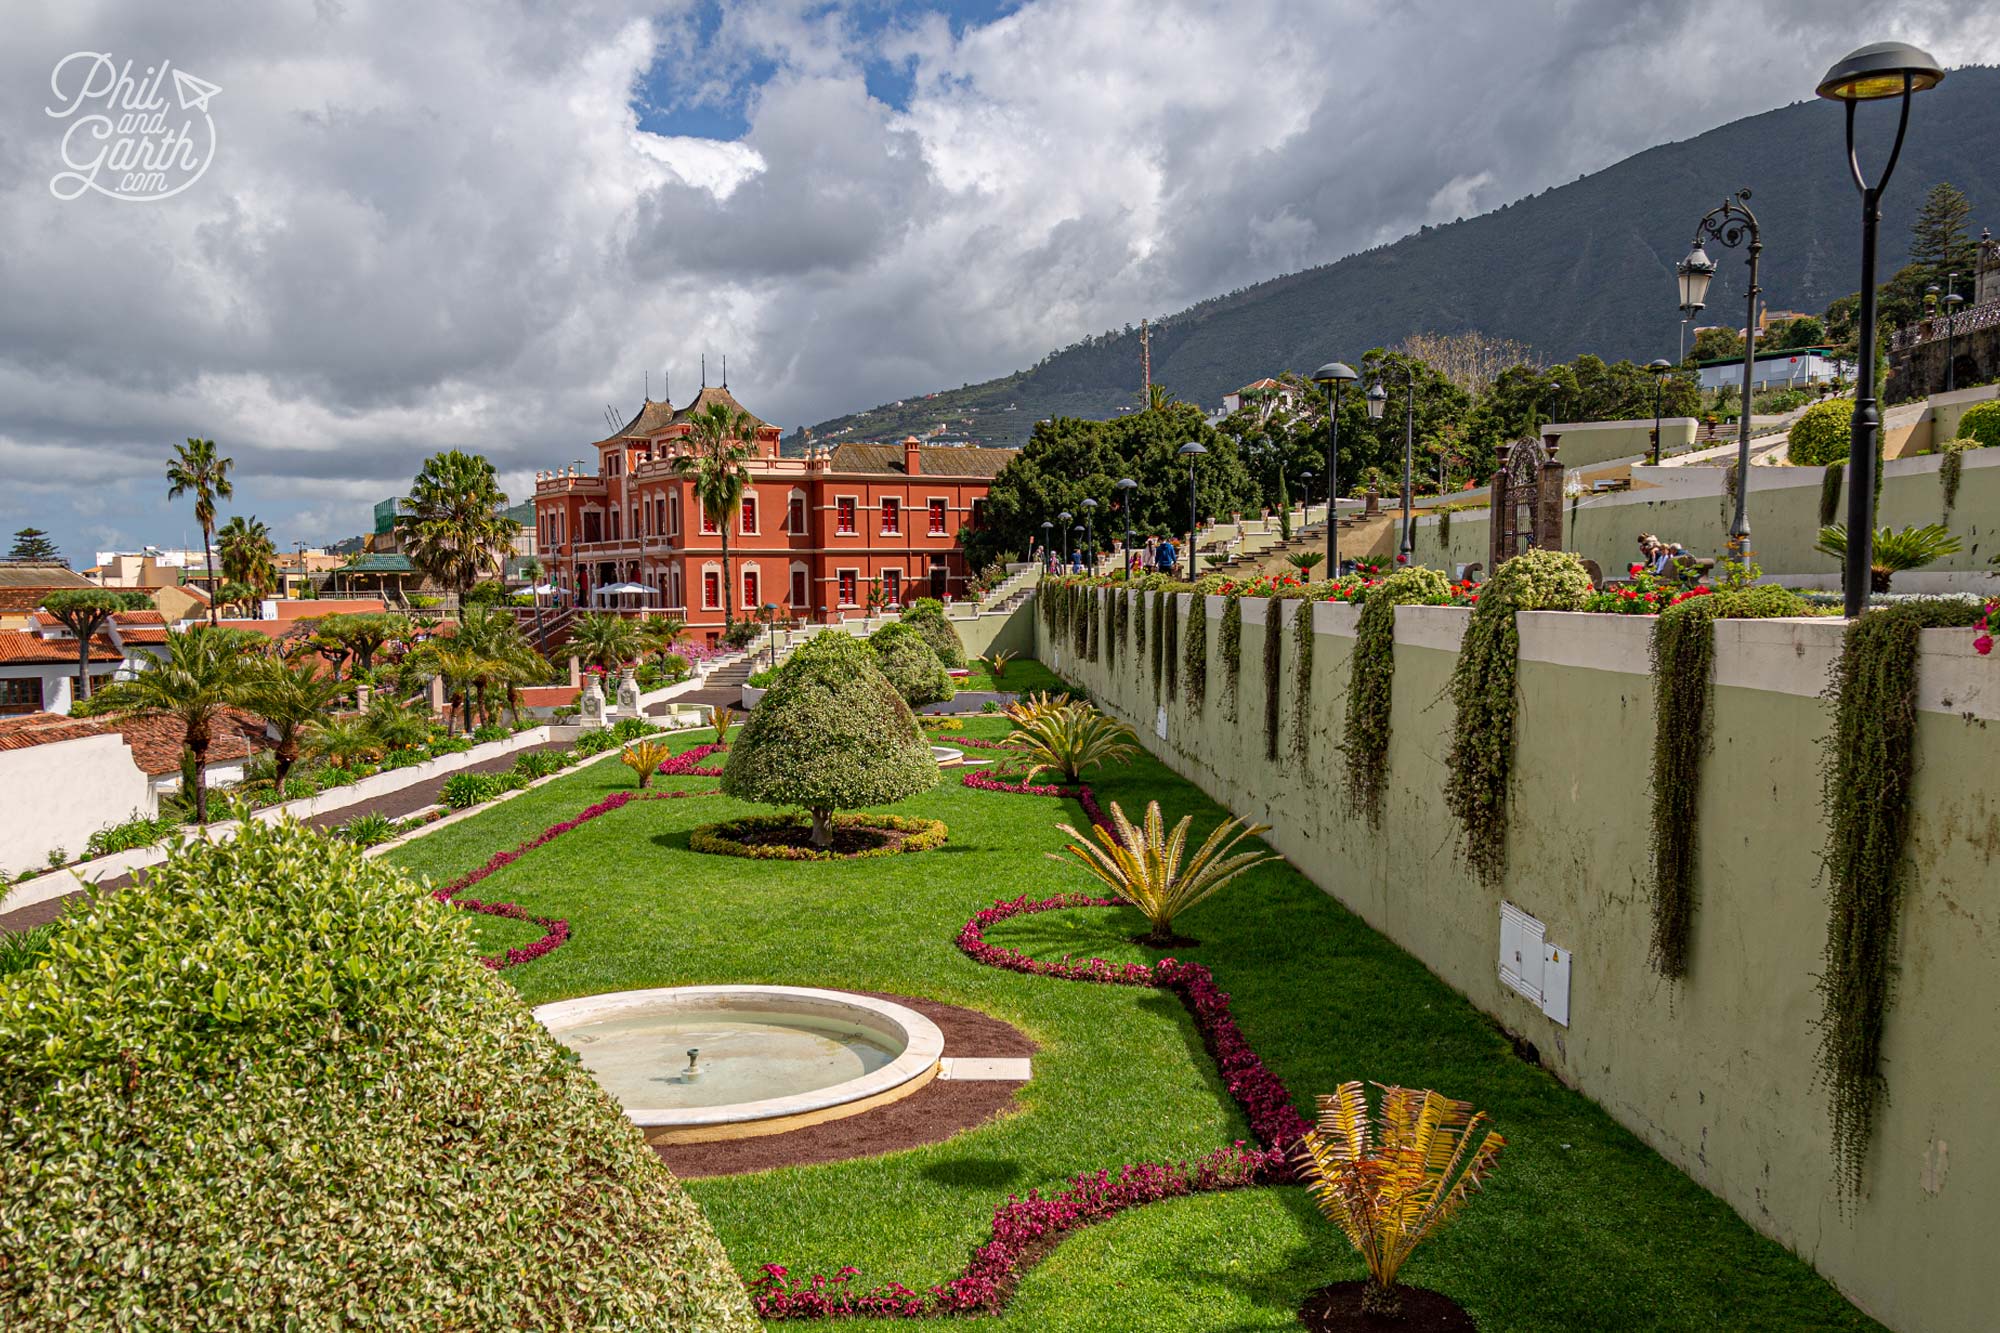 The gardens are very relaxing and offer stunning views of La Orotava. There's also a nice cafe in the gardens